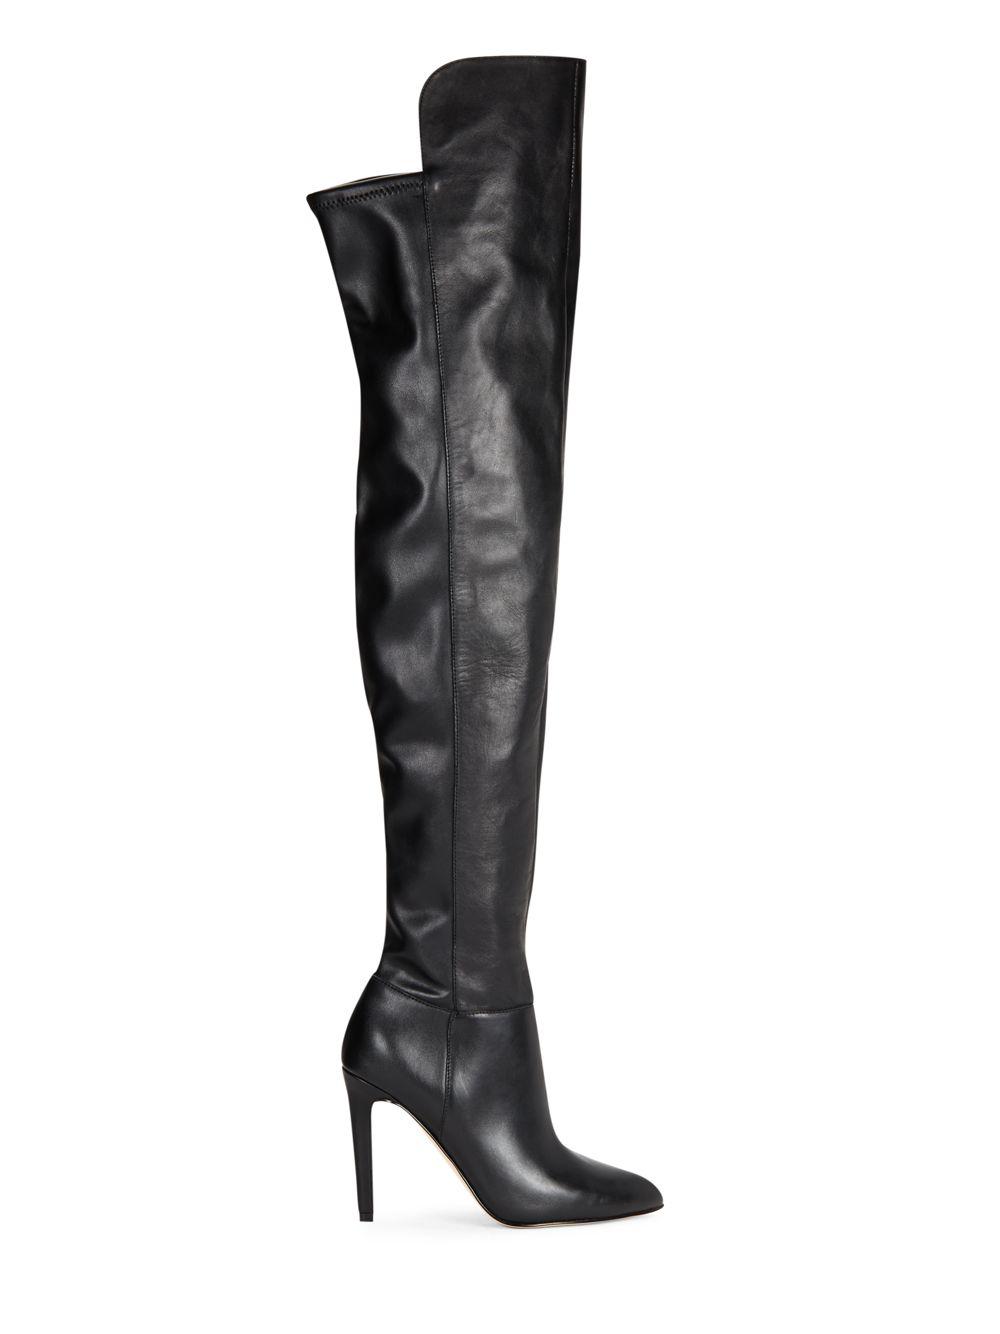 Saks Fifth Avenue Leather Thigh-high Boots in Black - Lyst